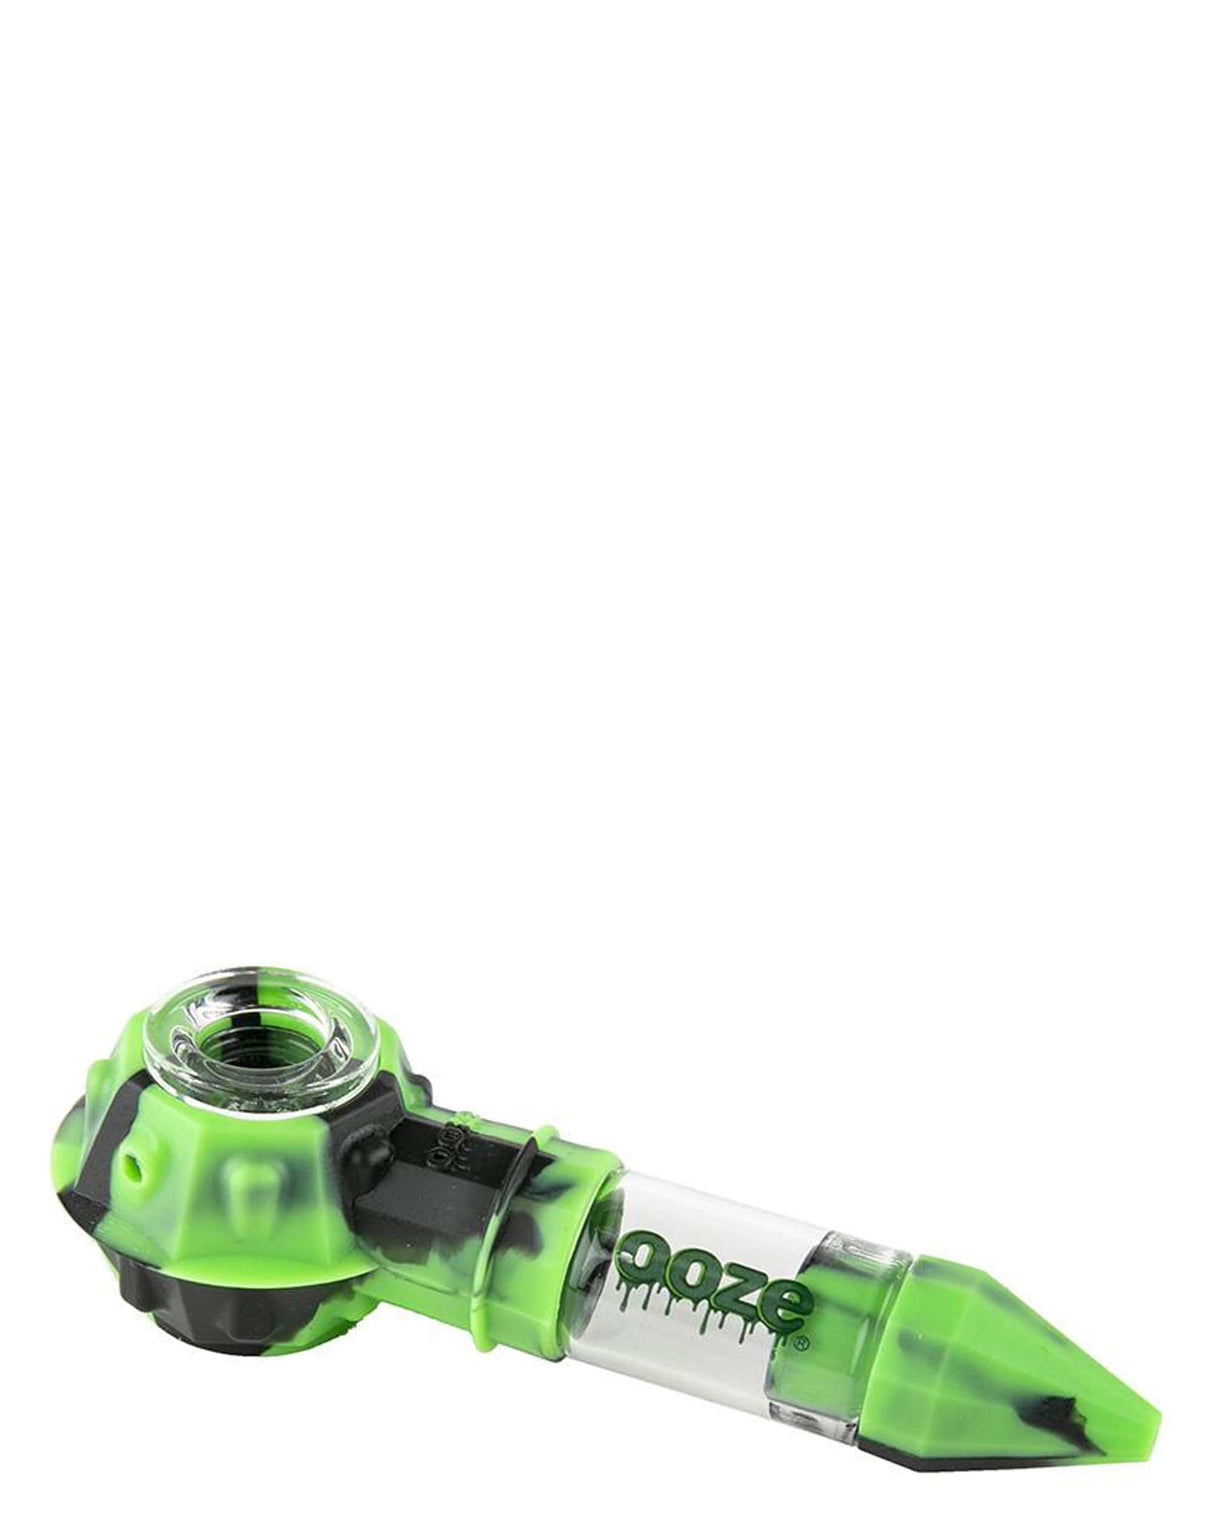 Ooze Bowser Silicone Pipe in green, angled view, with quartz bowl for dry herbs